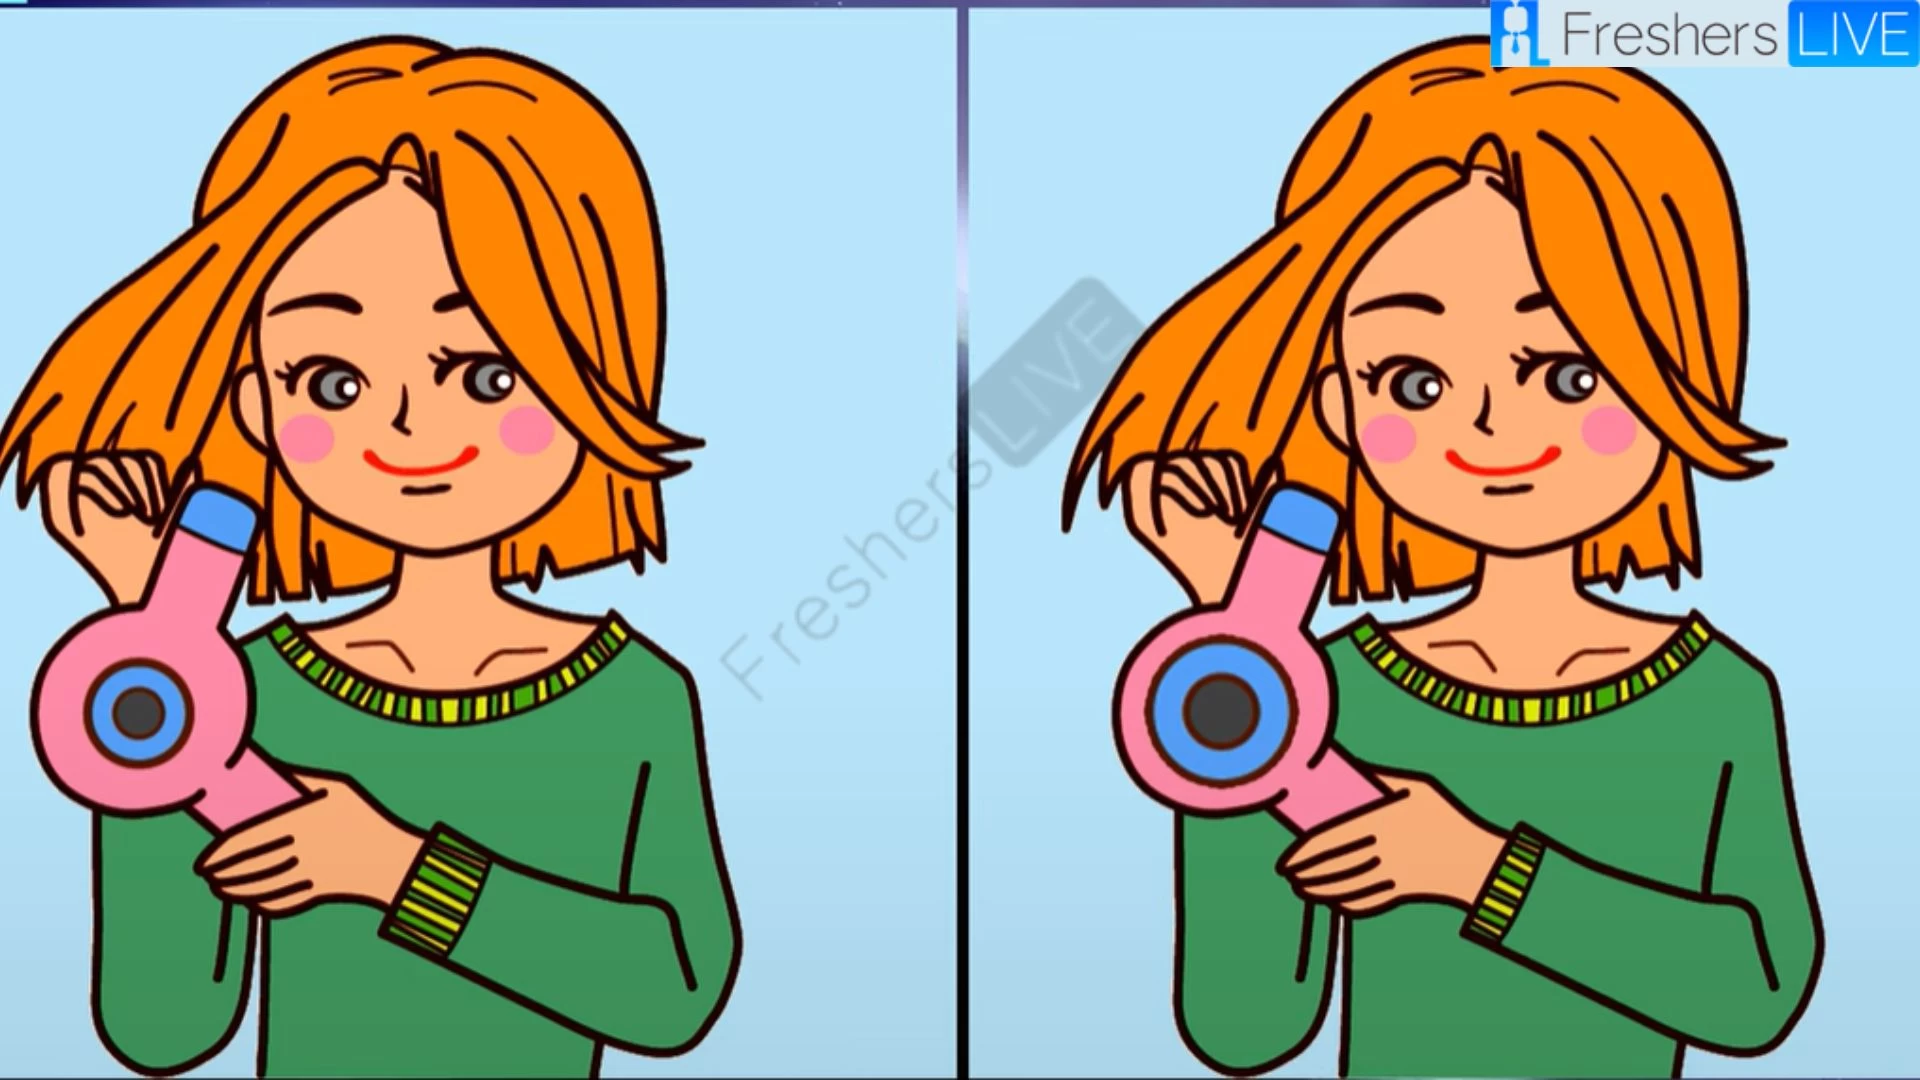 Notice 3 differences between the two ladies in 10 seconds!